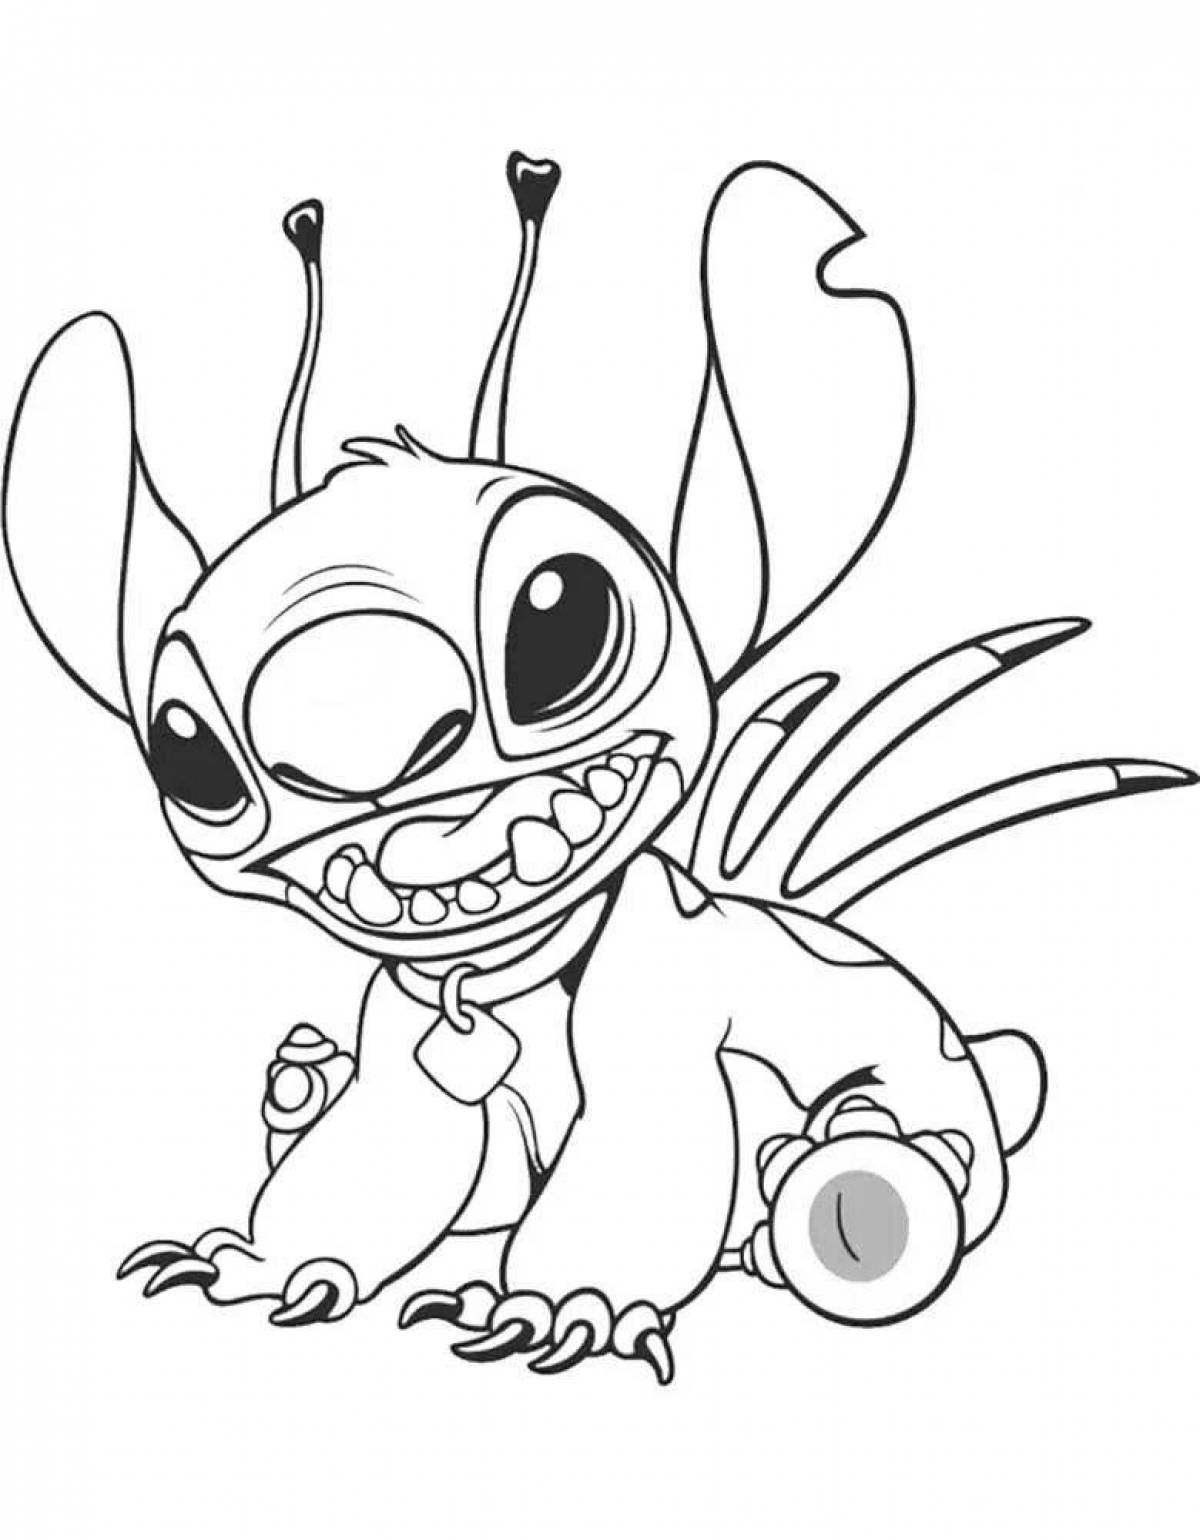 Witty coloring cute stitch